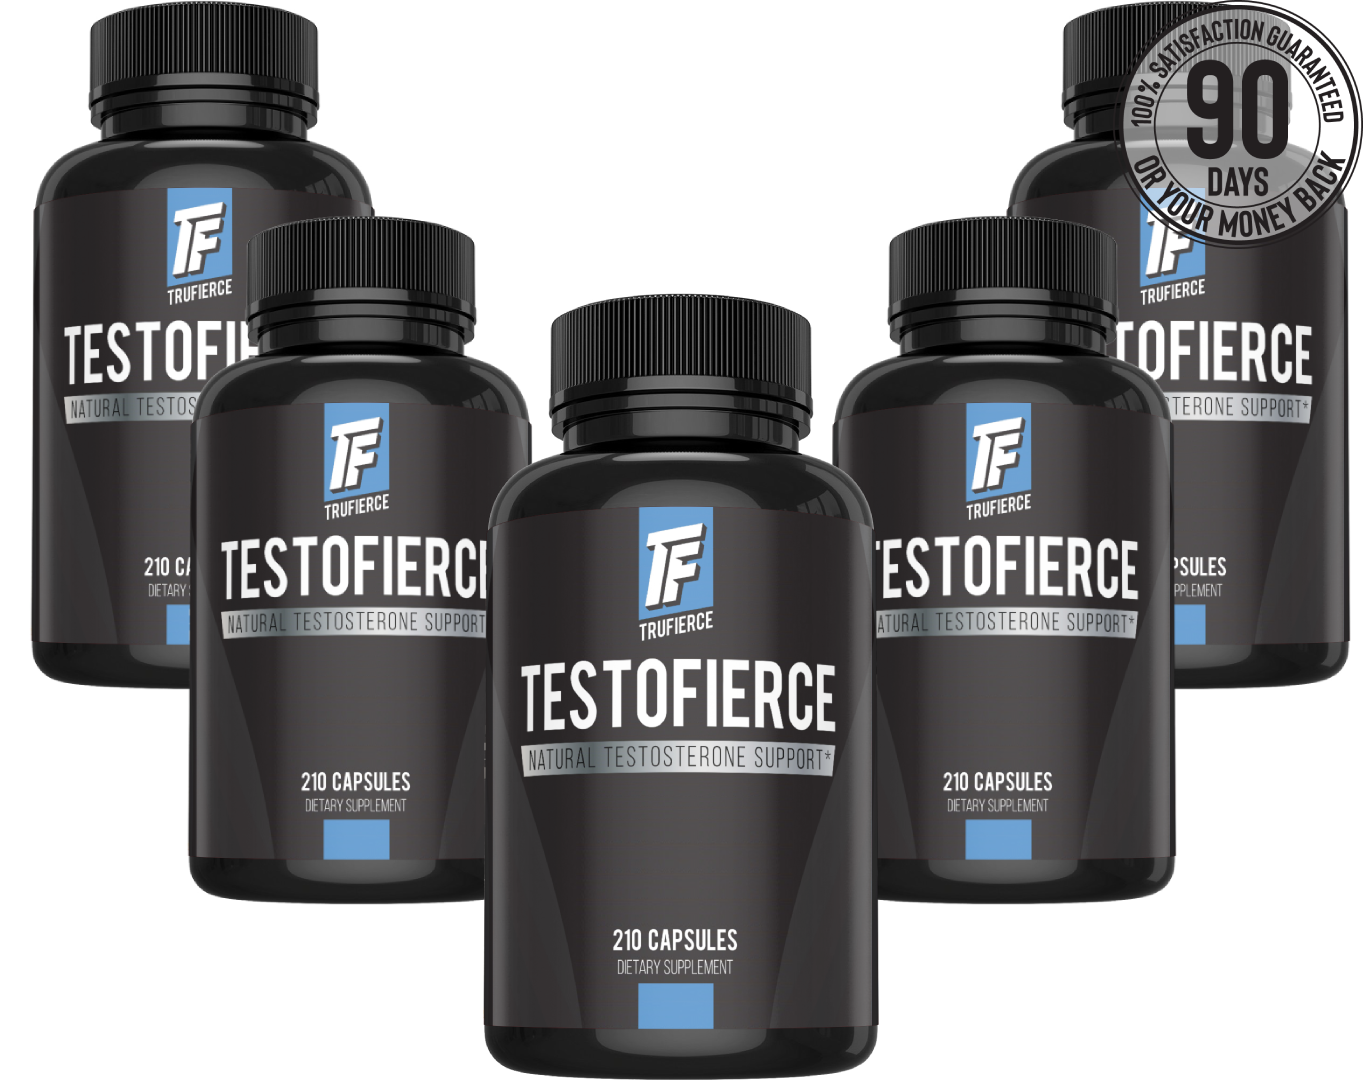 Best Testosterone Boosters in 2020 - Top 3 Supplements